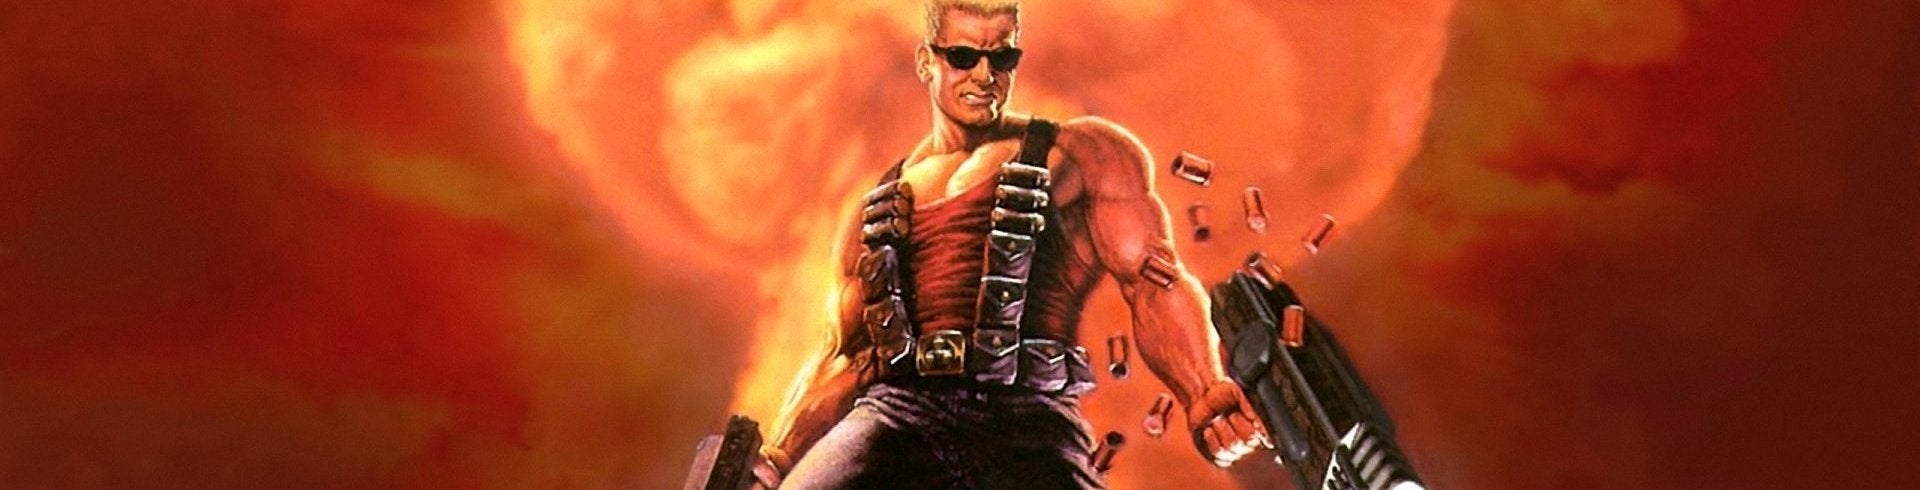 Image for How Duke Nukem 3D managed to be ahead of its time while trapped in the past